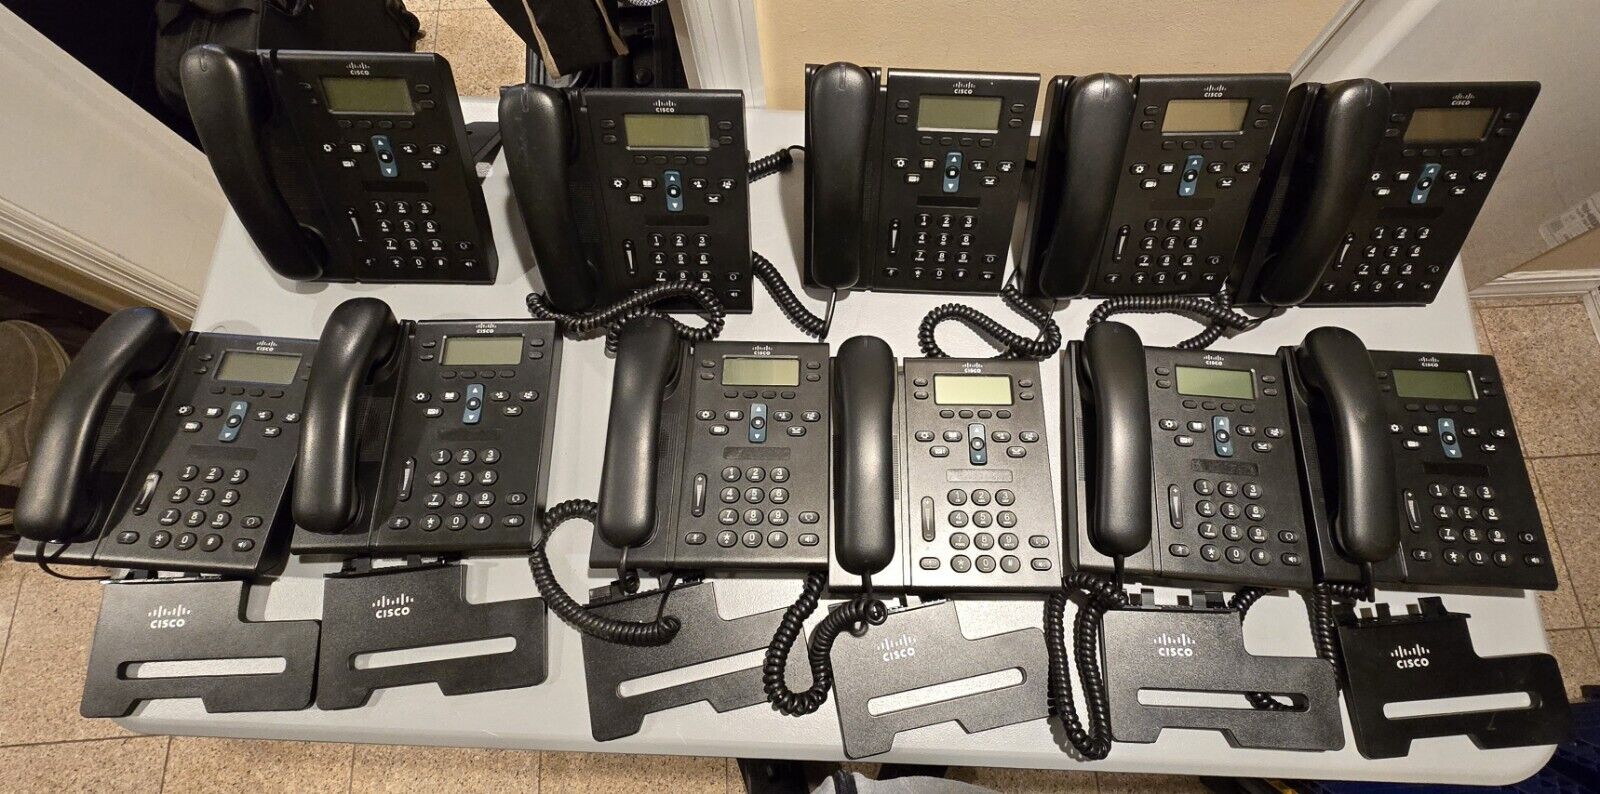 Qty 11 - Cisco CP-6941 Unified IP Phone CP6941 Telephone w/Stand Qty 11